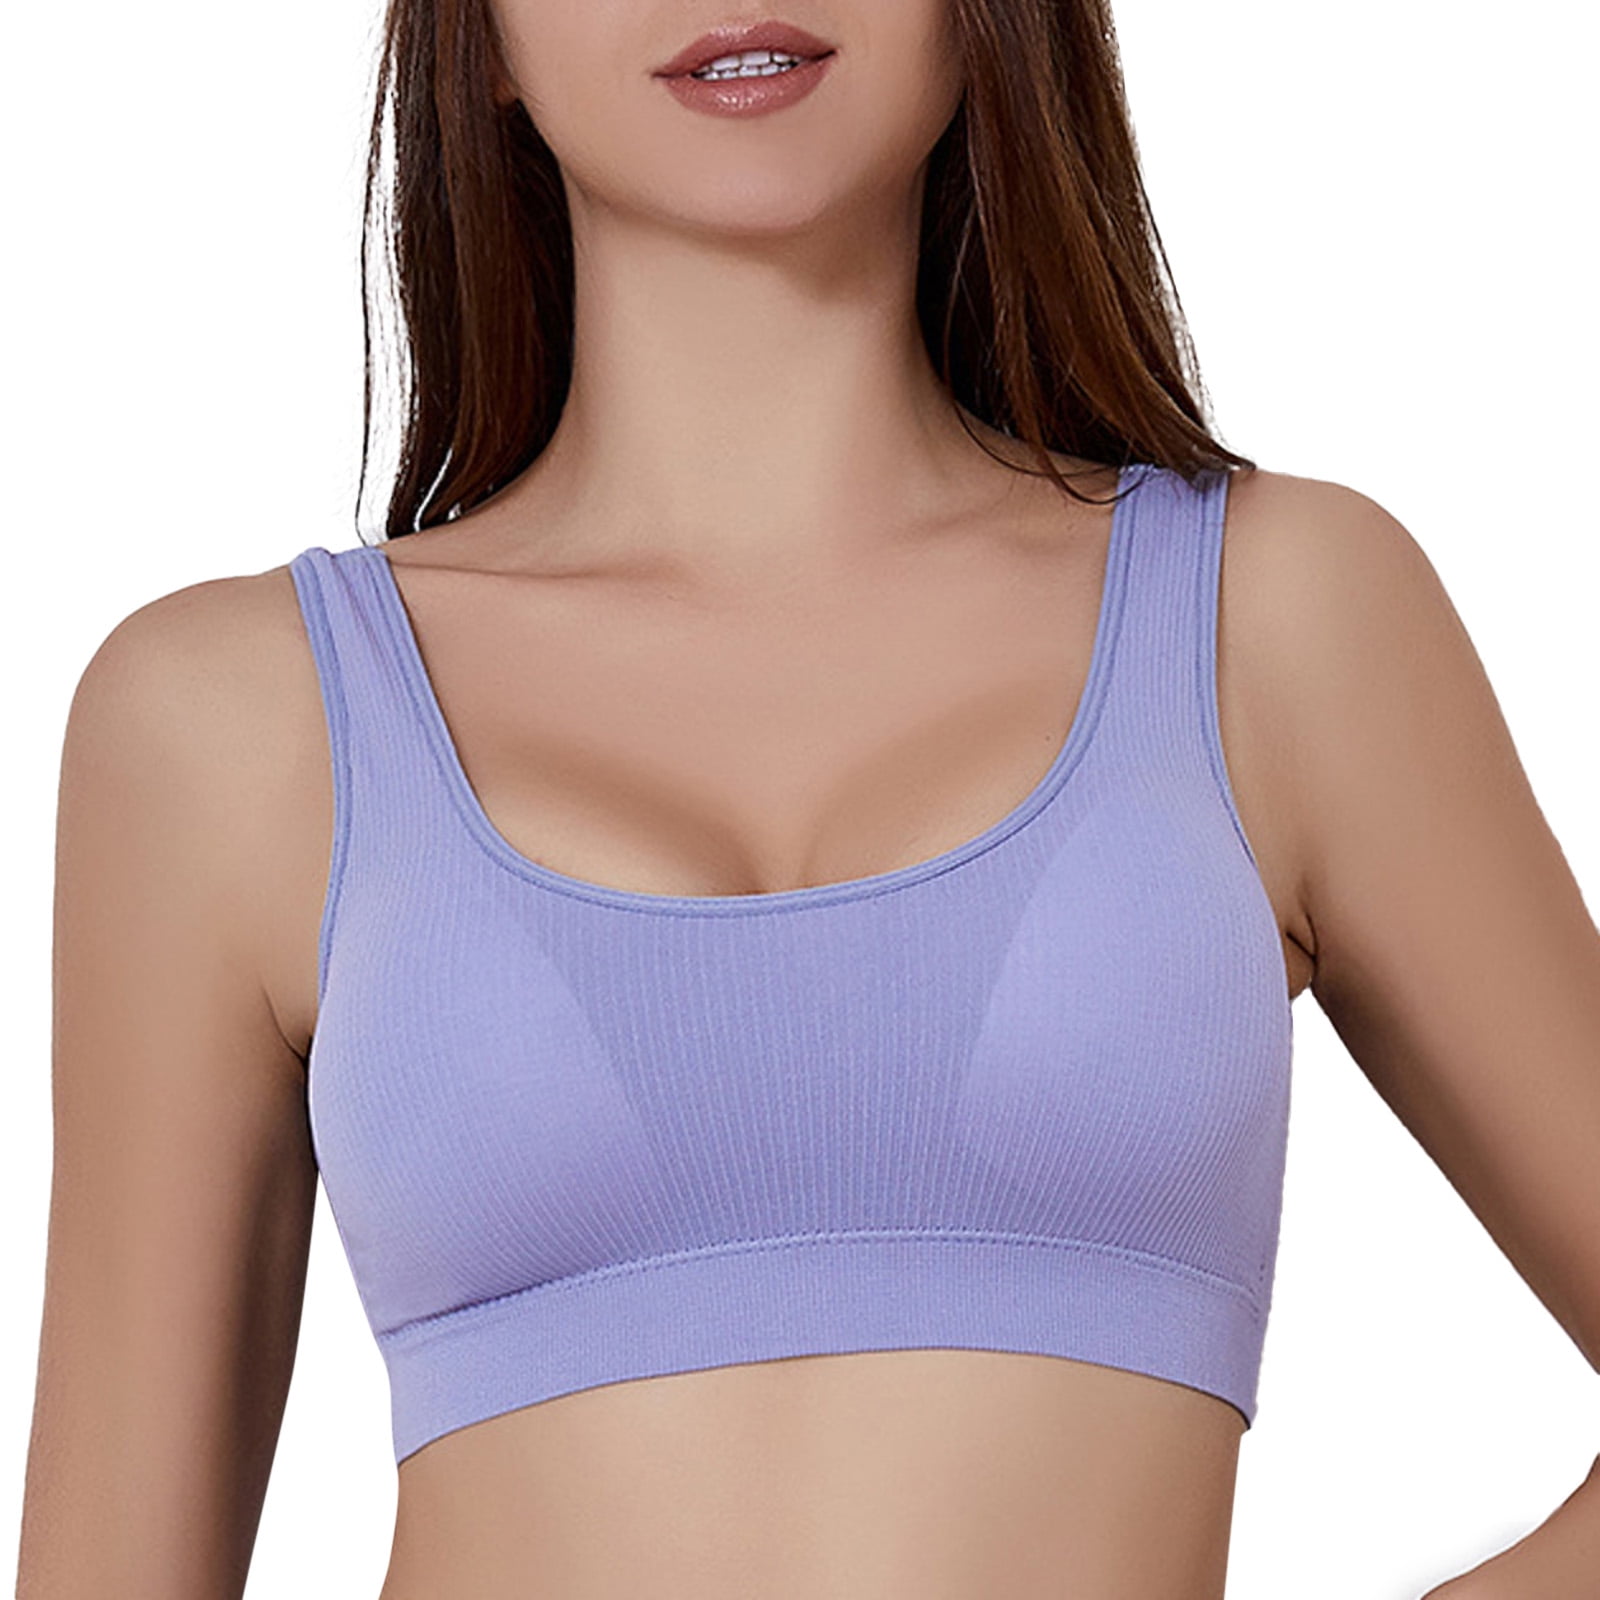 adviicd Push Up Sports Bras for Women Underwire Demi Bra, Push-Up Bra with  Wonderbra Technology, Smoothing Lace-Trim Bra with Push-Up Cups Blue